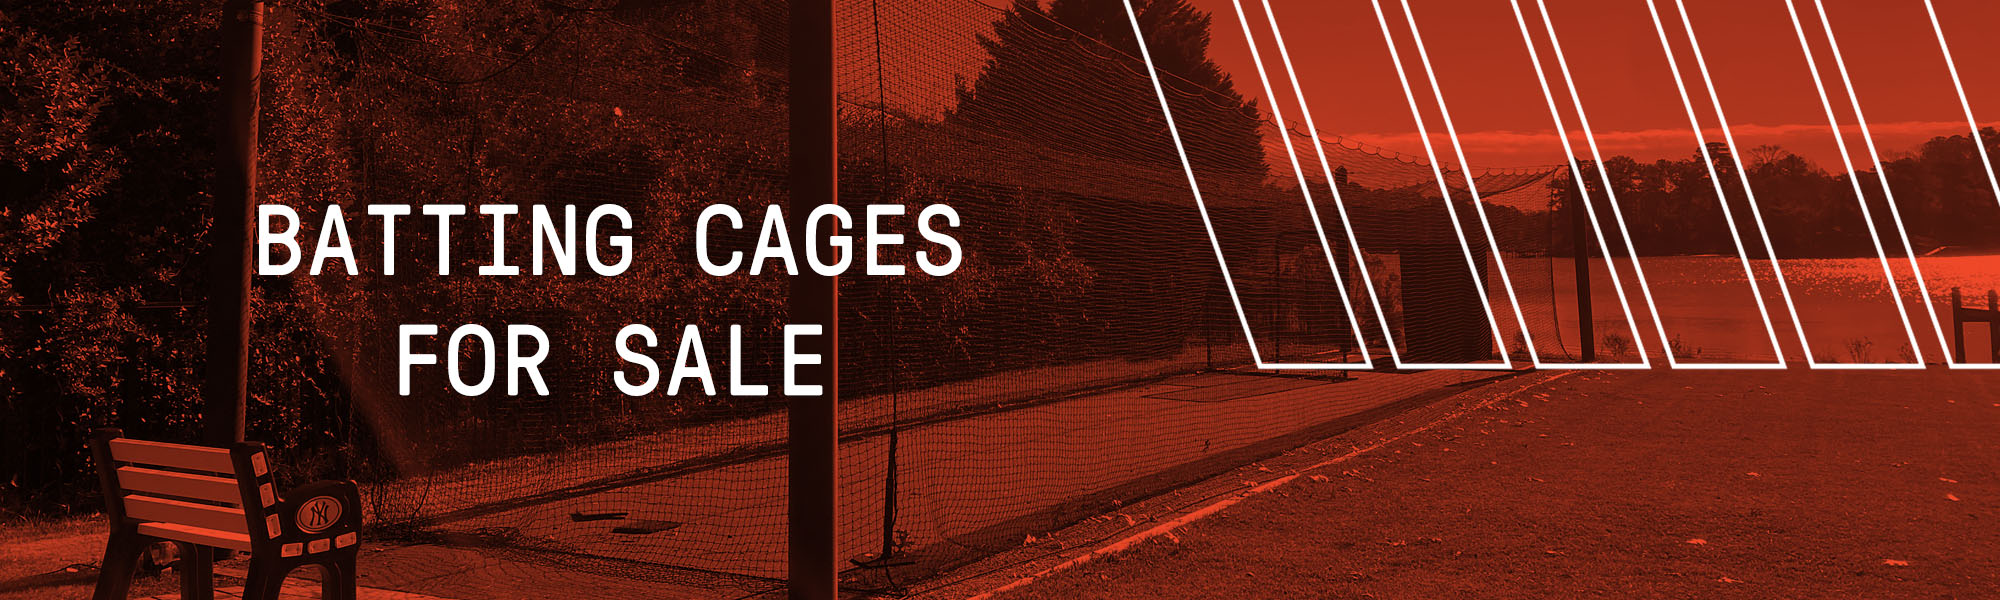 Batting Cages for Sale